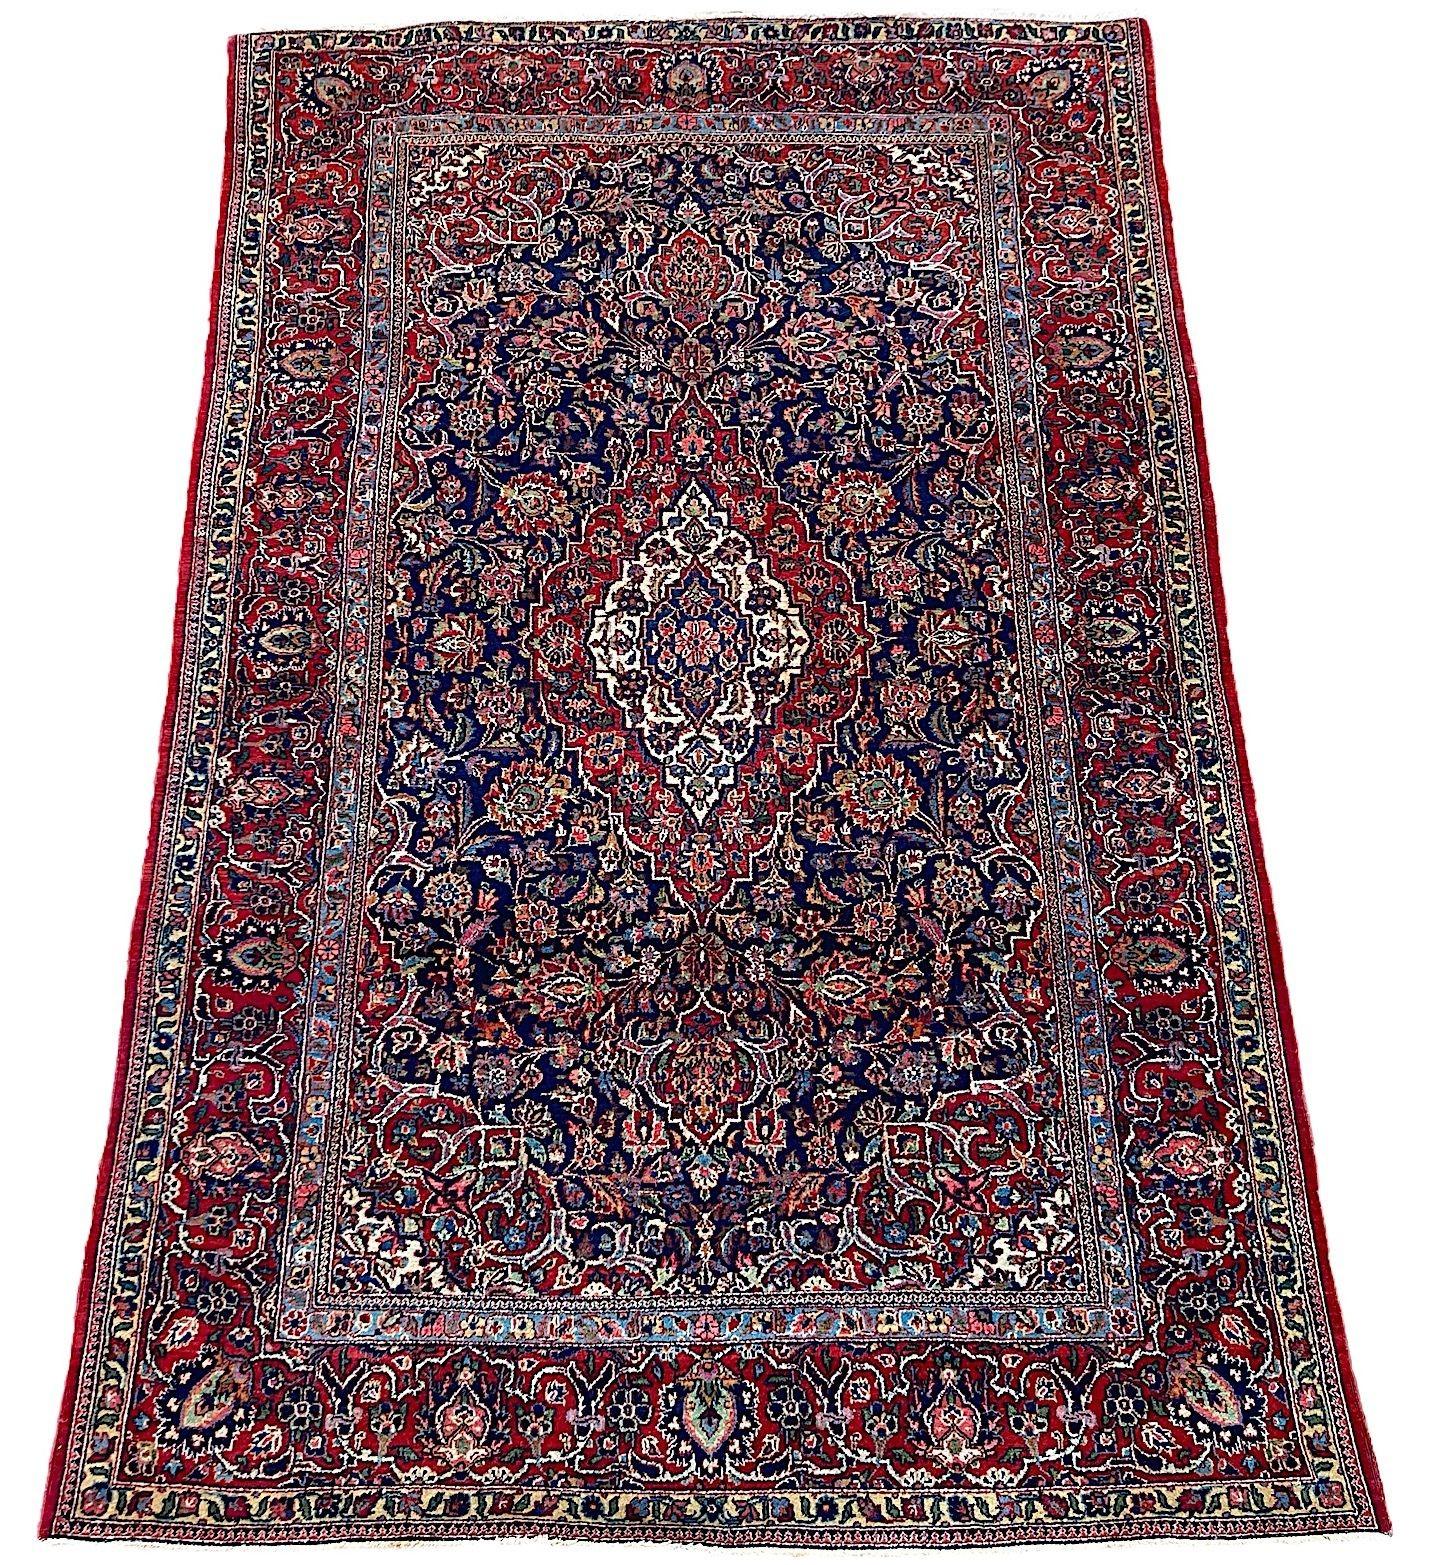 A lovely vintage Kashan rug, hand woven circa 1940. The rug features a classic Kashan design of a singular medallion on an indigo field of interconnected flowers and vines surrounded by a rich red border. Finely woven with lovely secondary